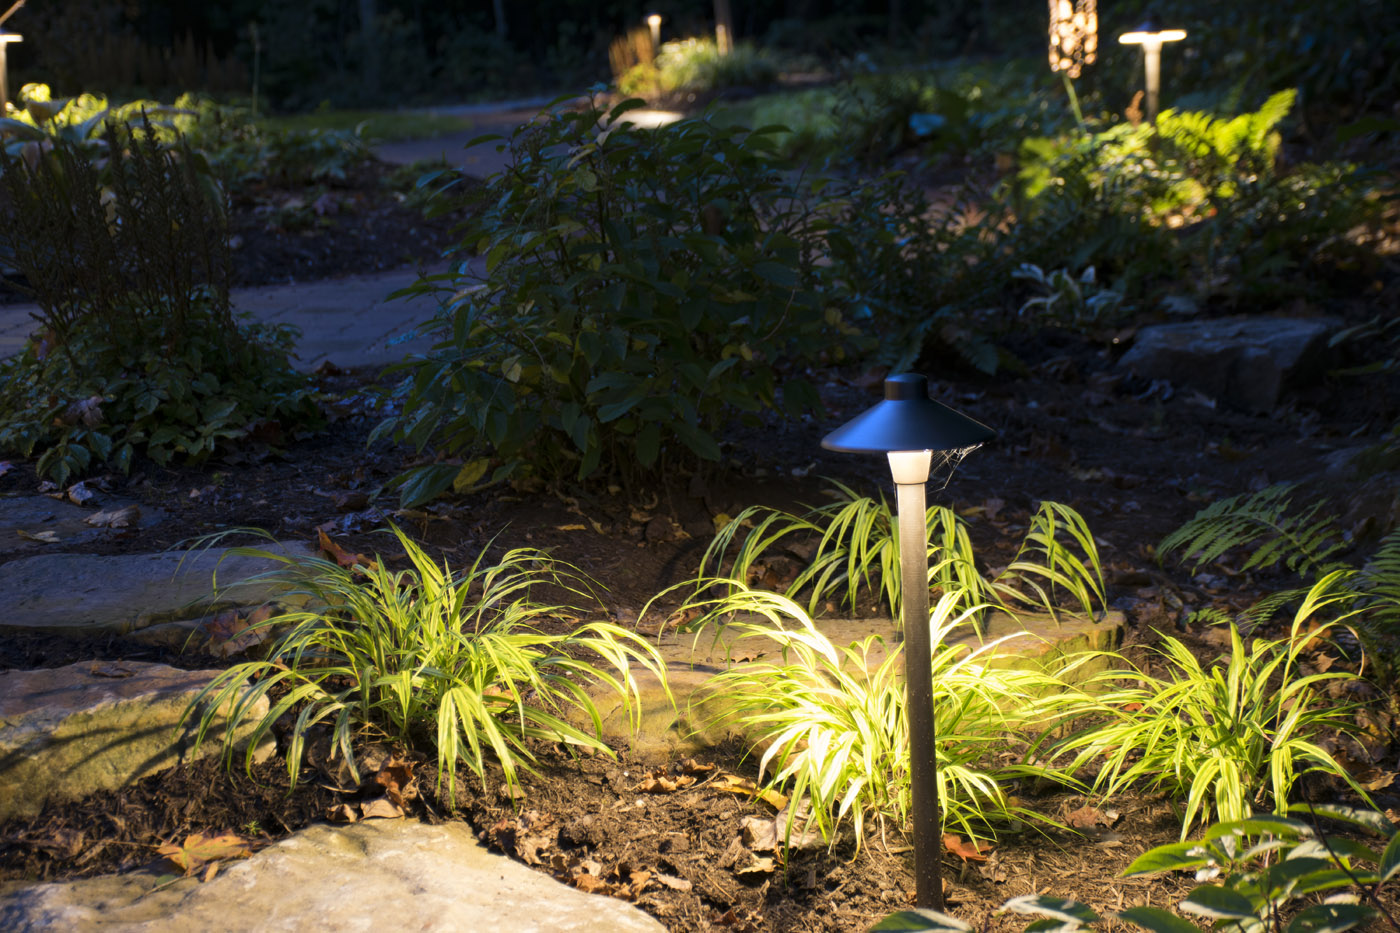 Path with specialty lighting